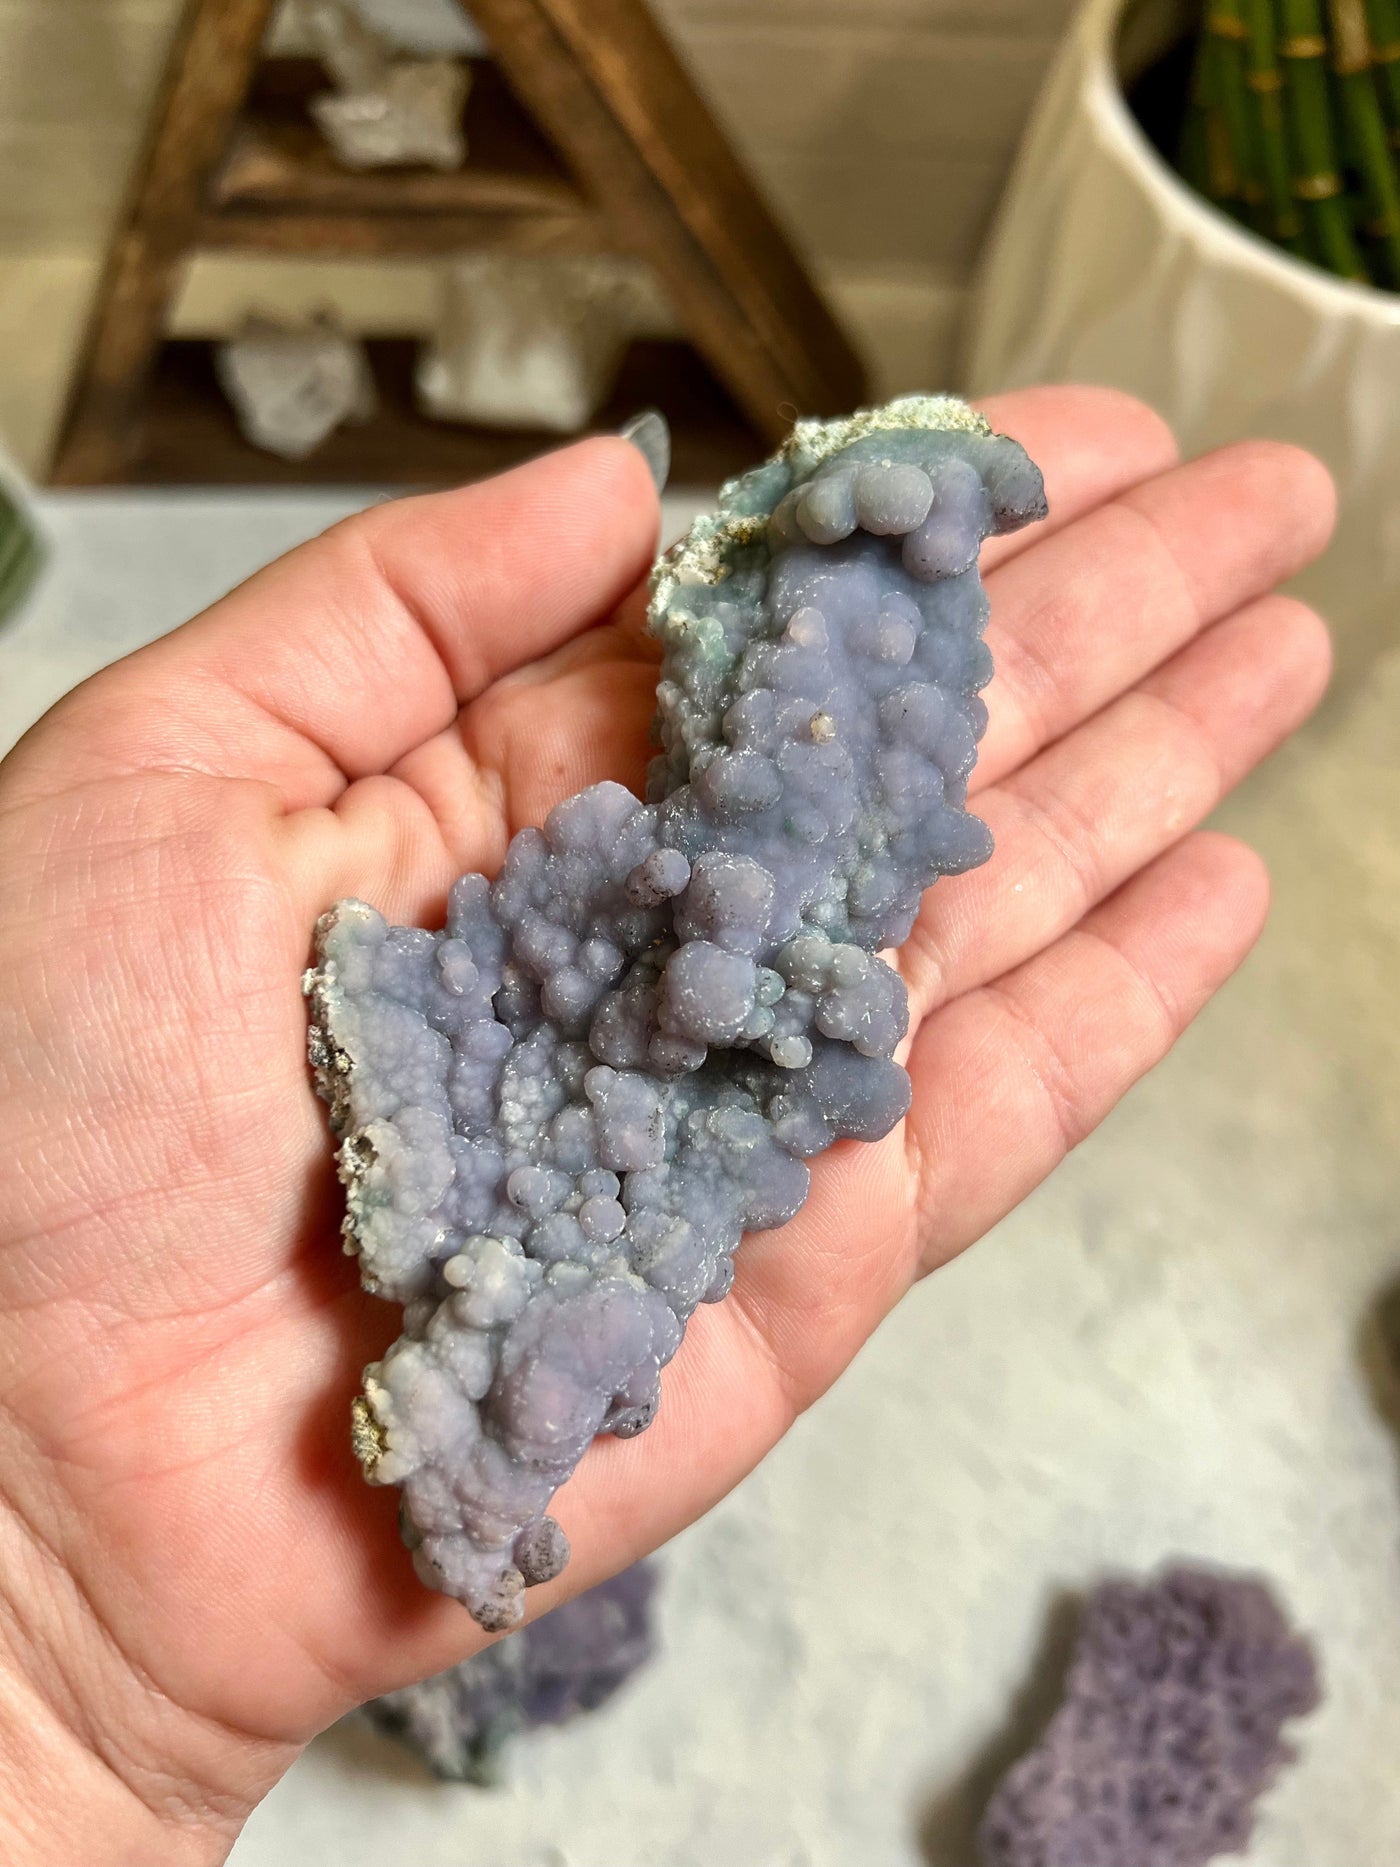 backside of Grape agate formation in a woman's hand.